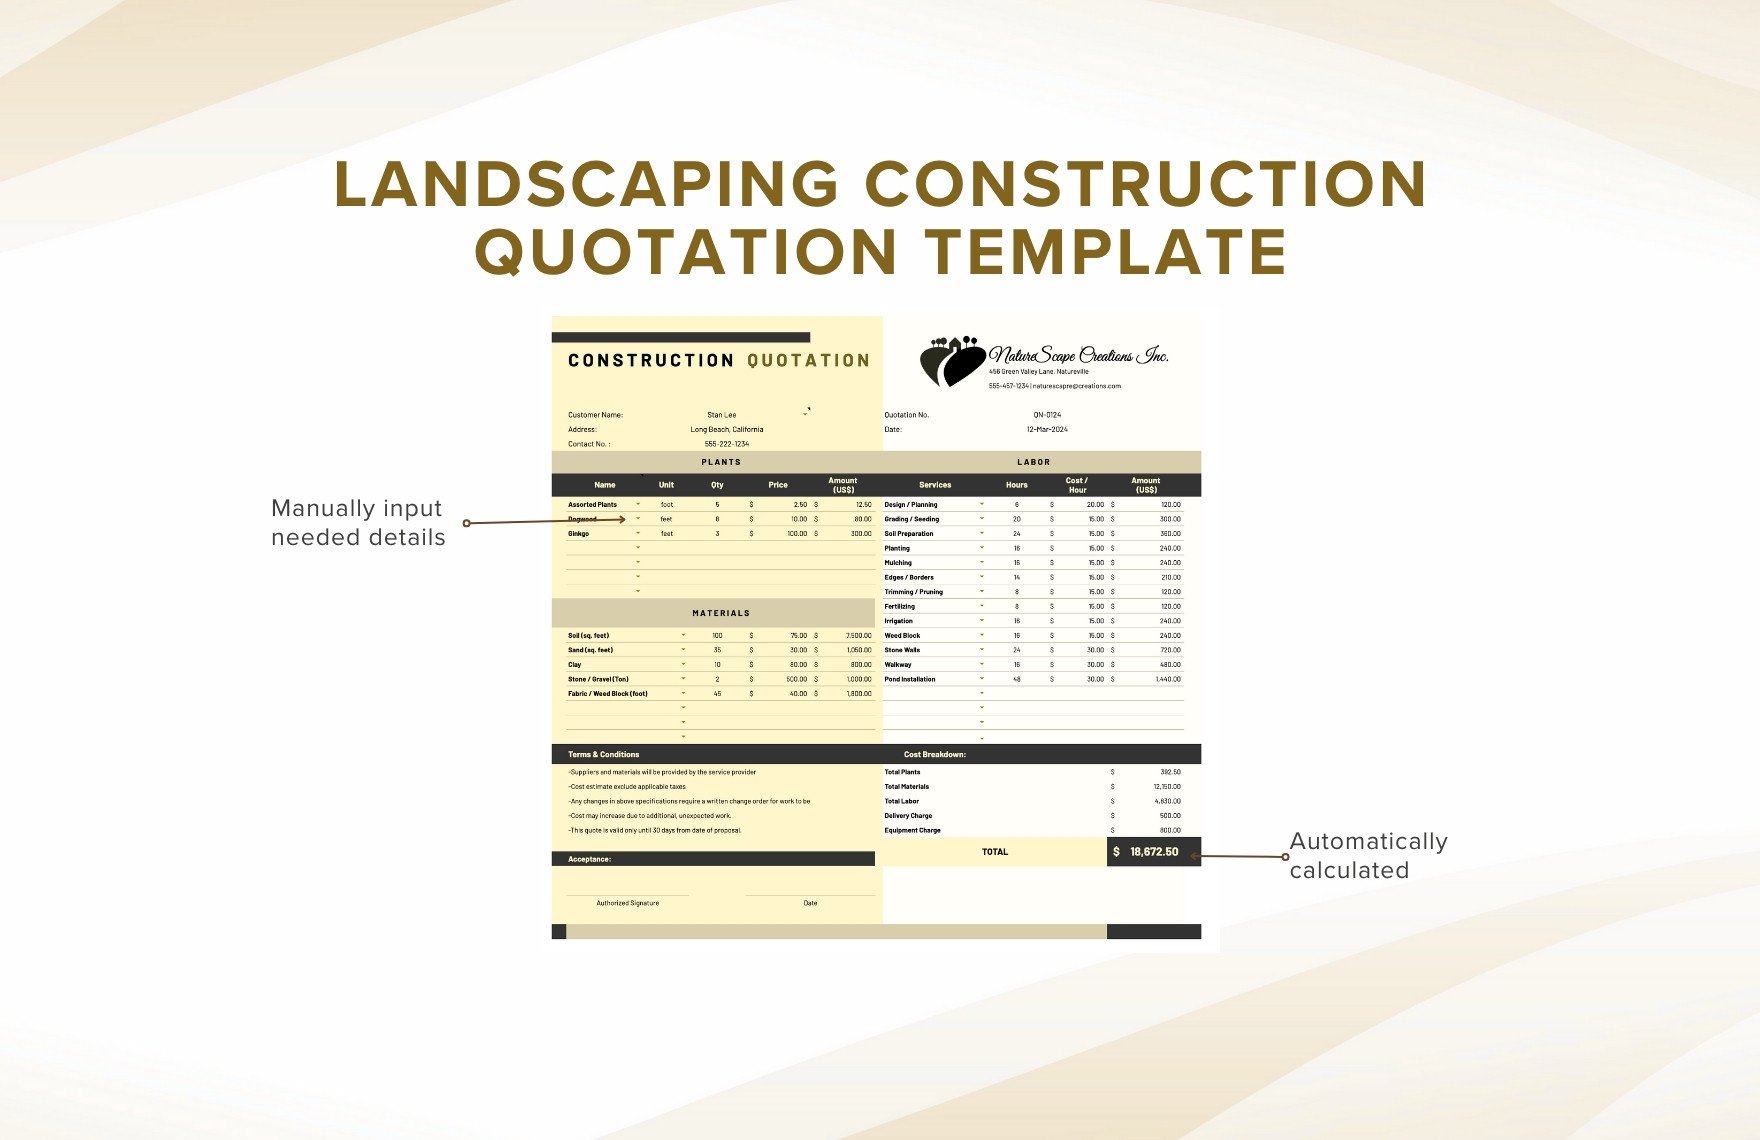 Landscaping Construction Quotation Template